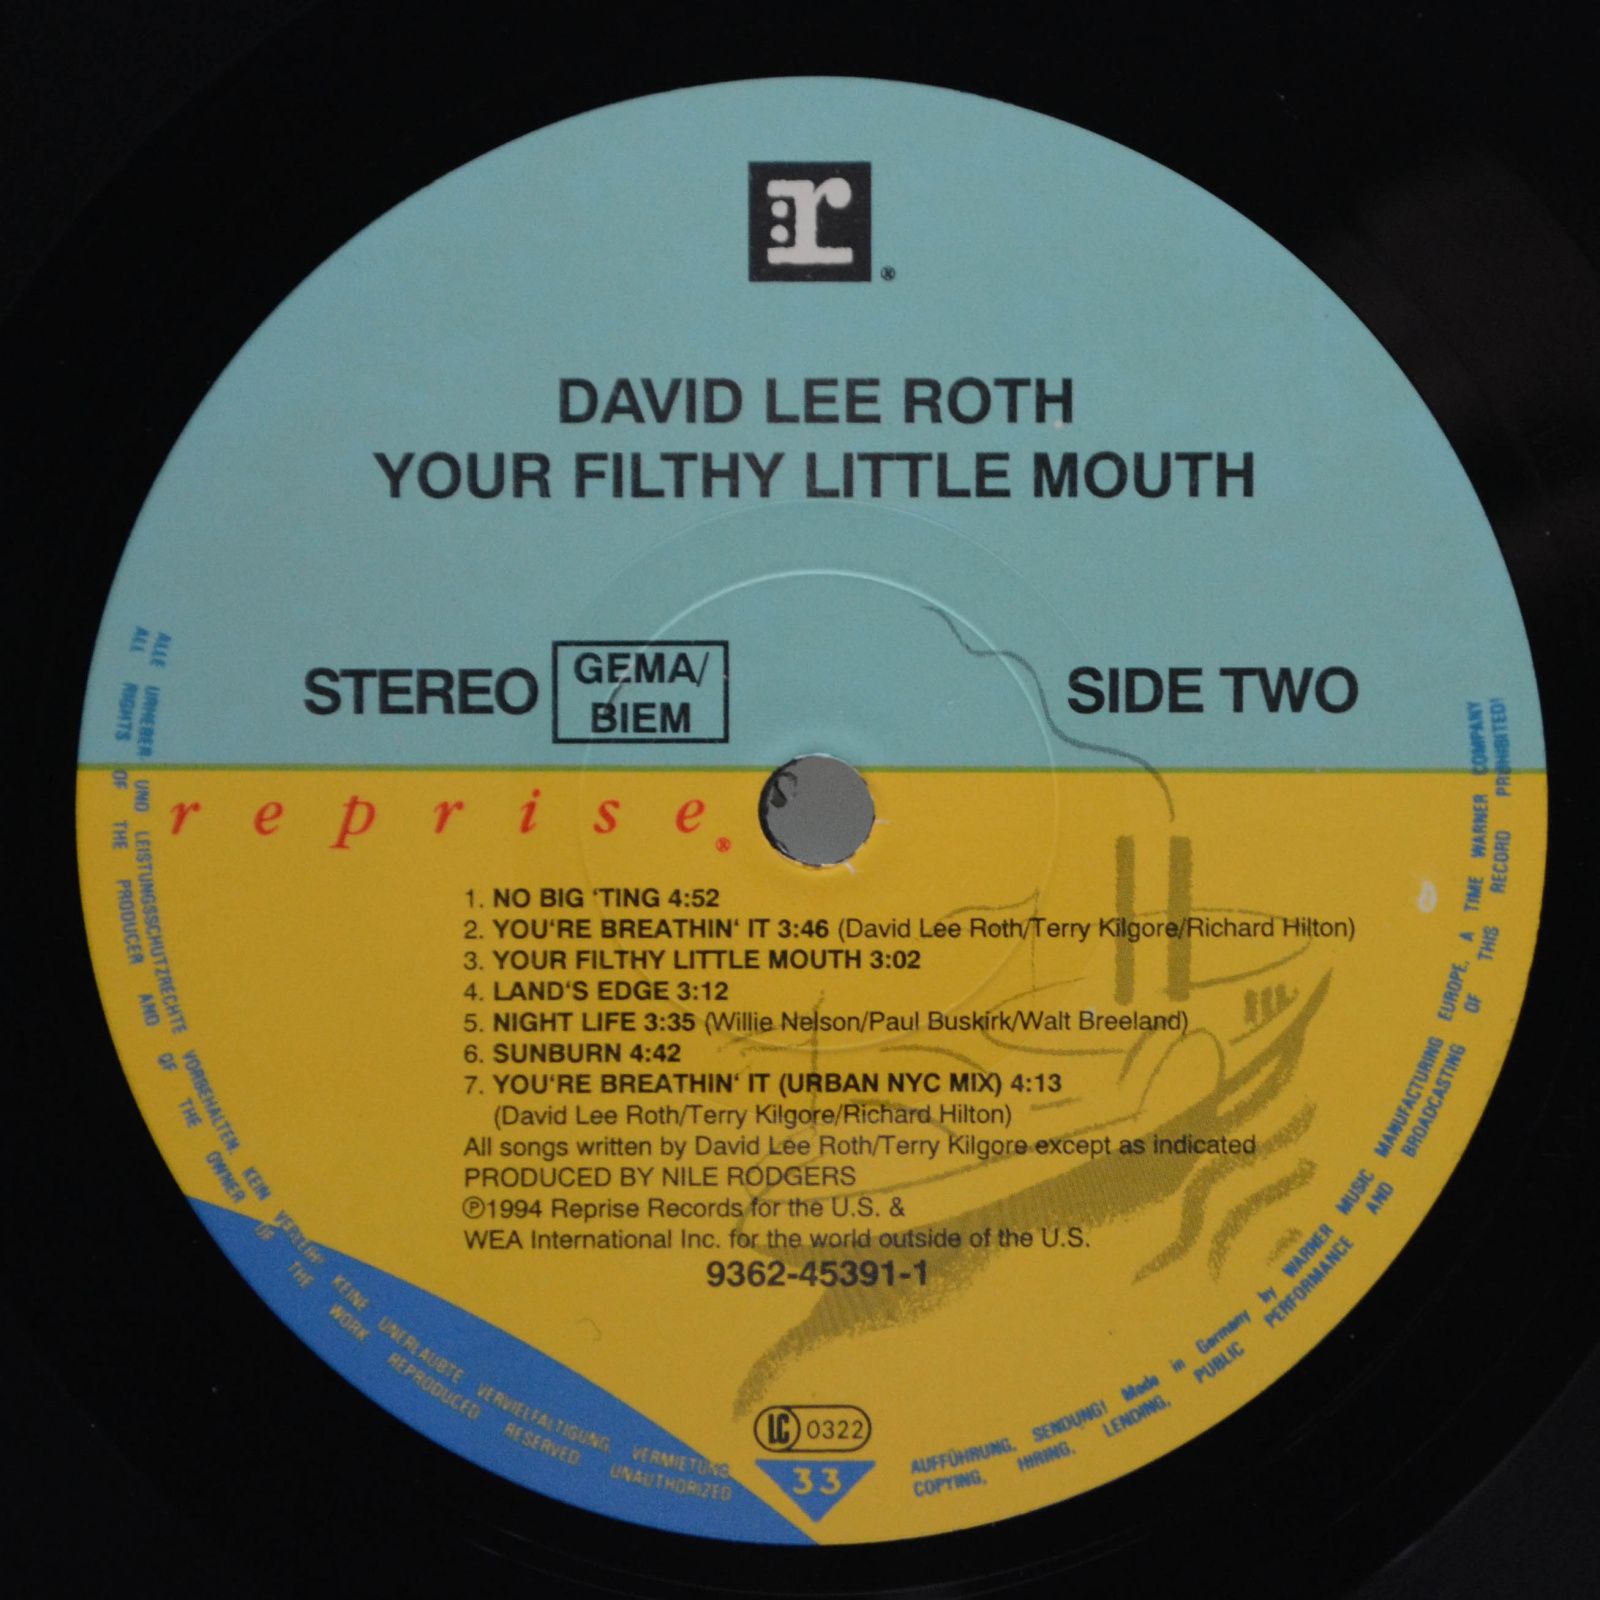 David Lee Roth — Your Filthy Little Mouth, 1994